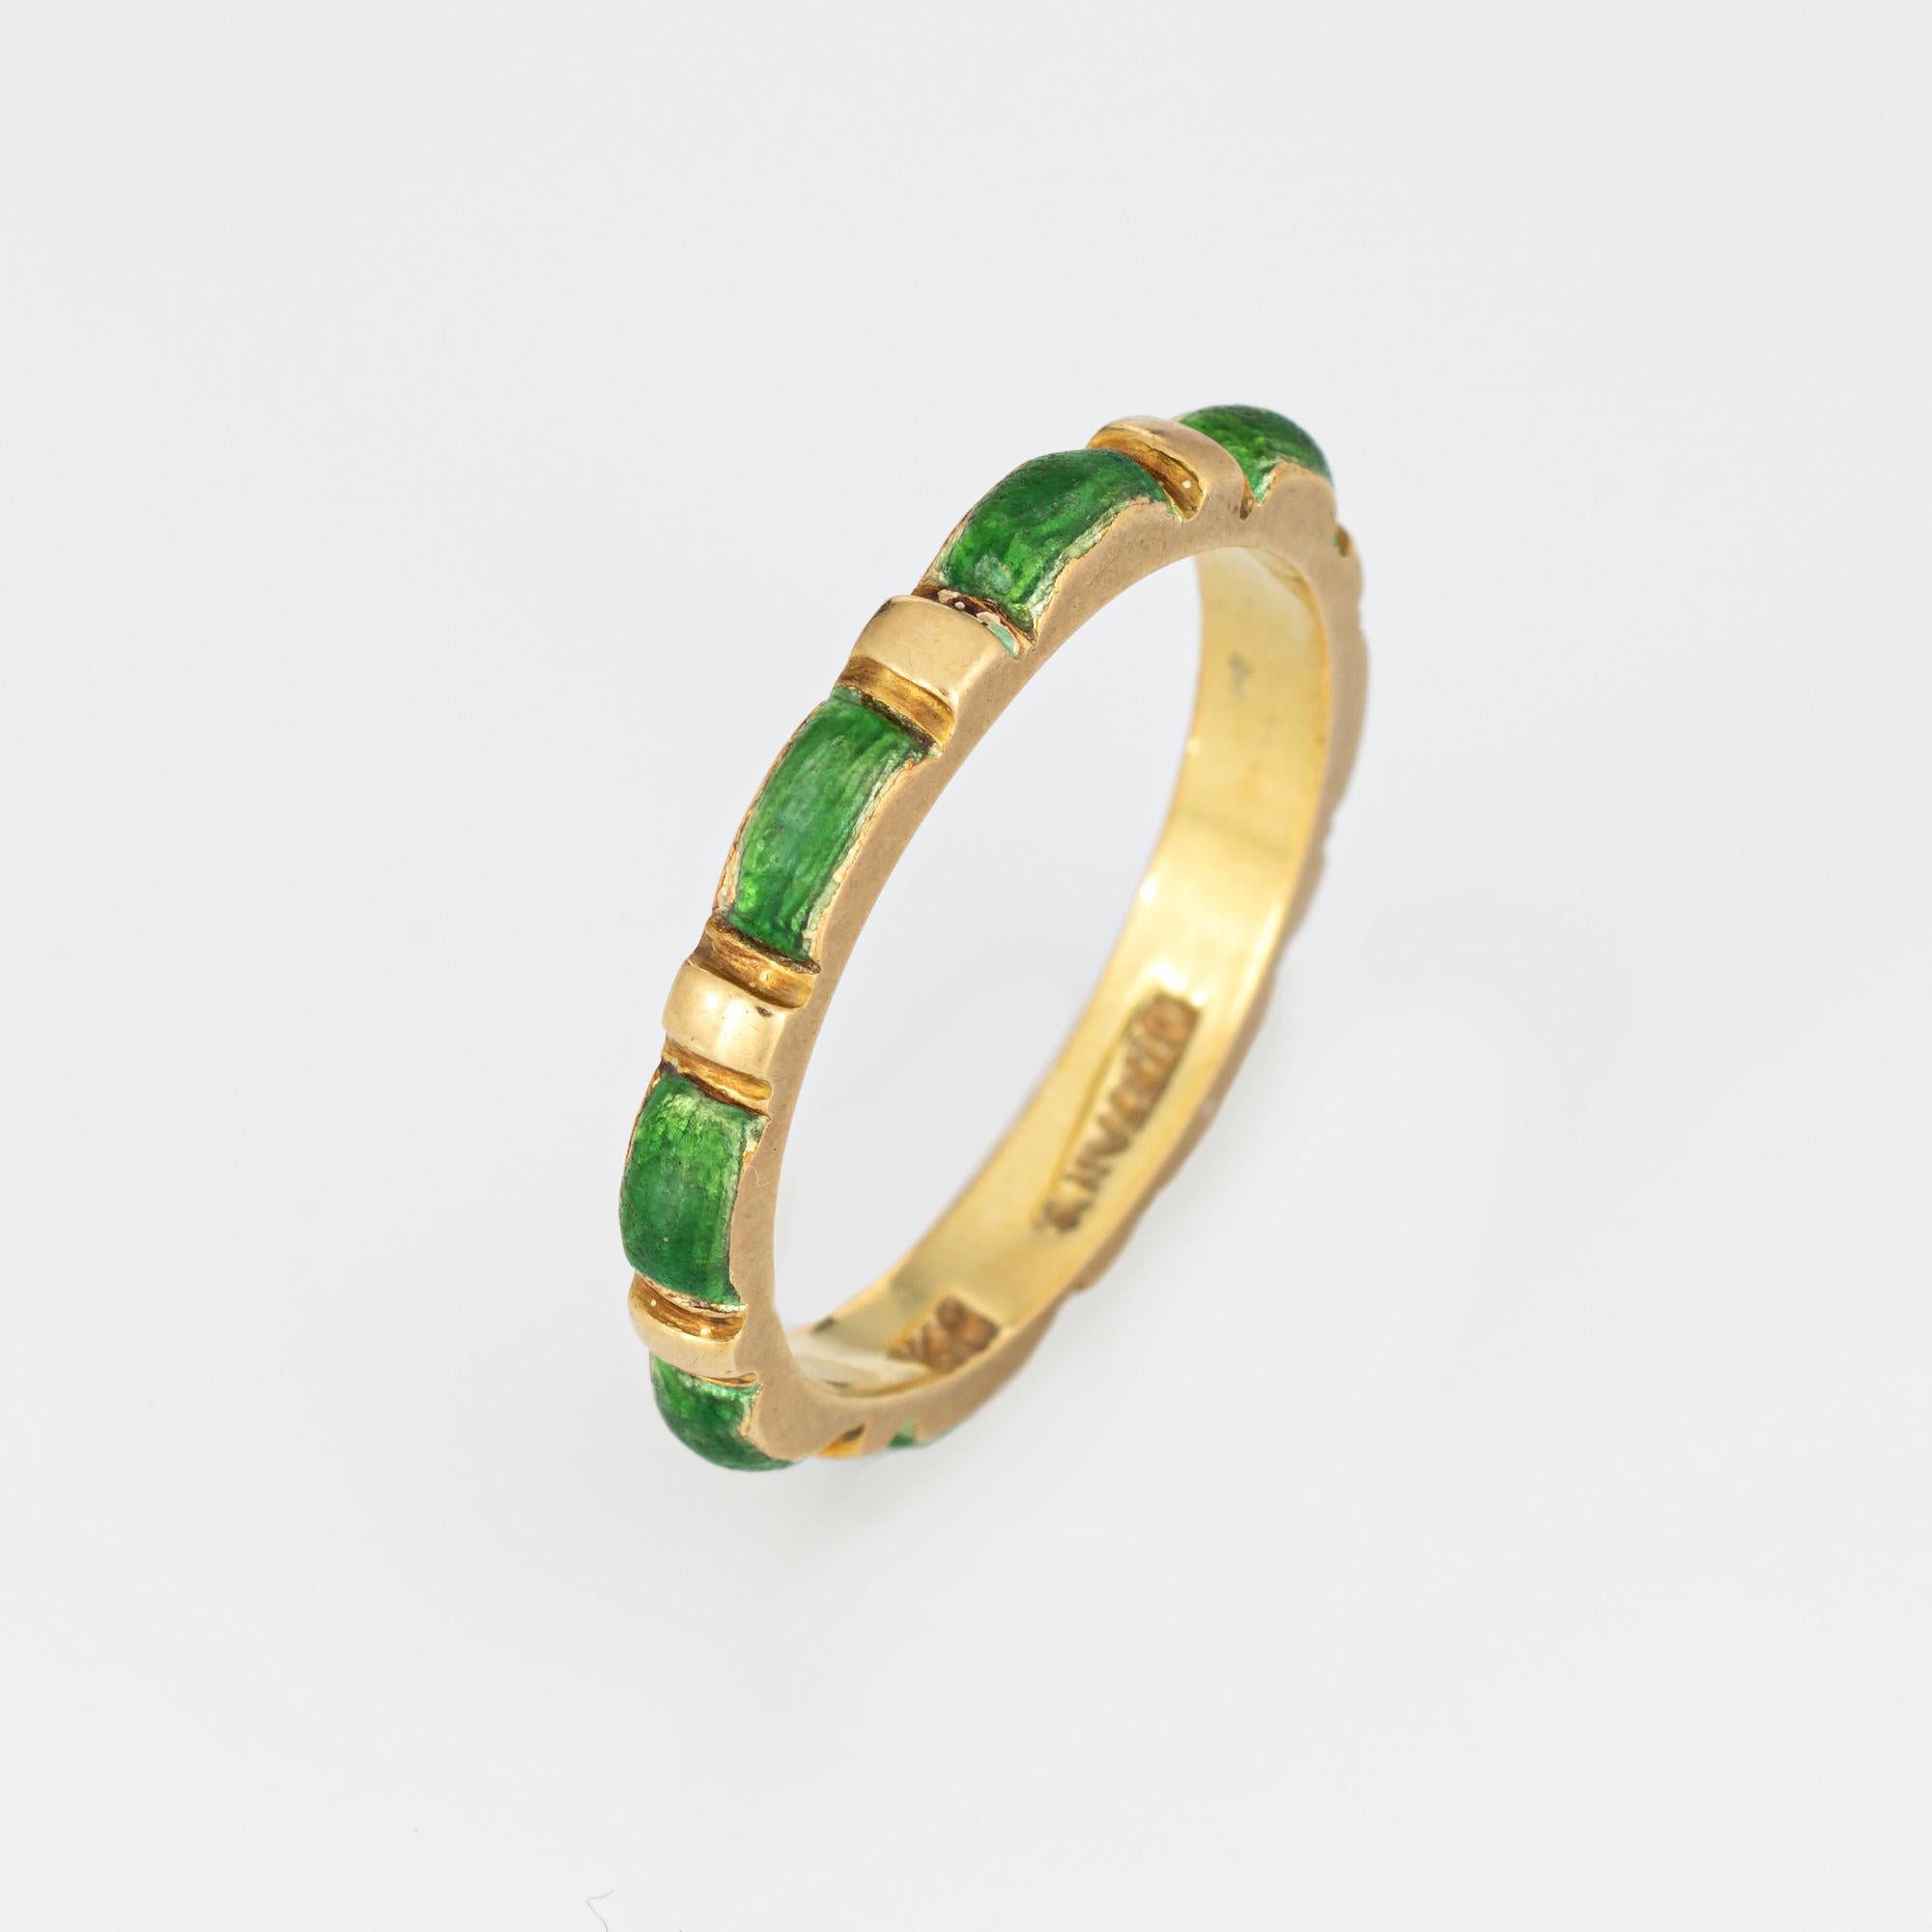 Vintage Tiffany & Co green enamel ring crafted in 18 karat yellow gold (circa 1970s to 1980s).  

Green enameled panels are continuous around the band for a seamless look. The enamel is in fair condition with enamel loss present. The slim 2.5mm wide